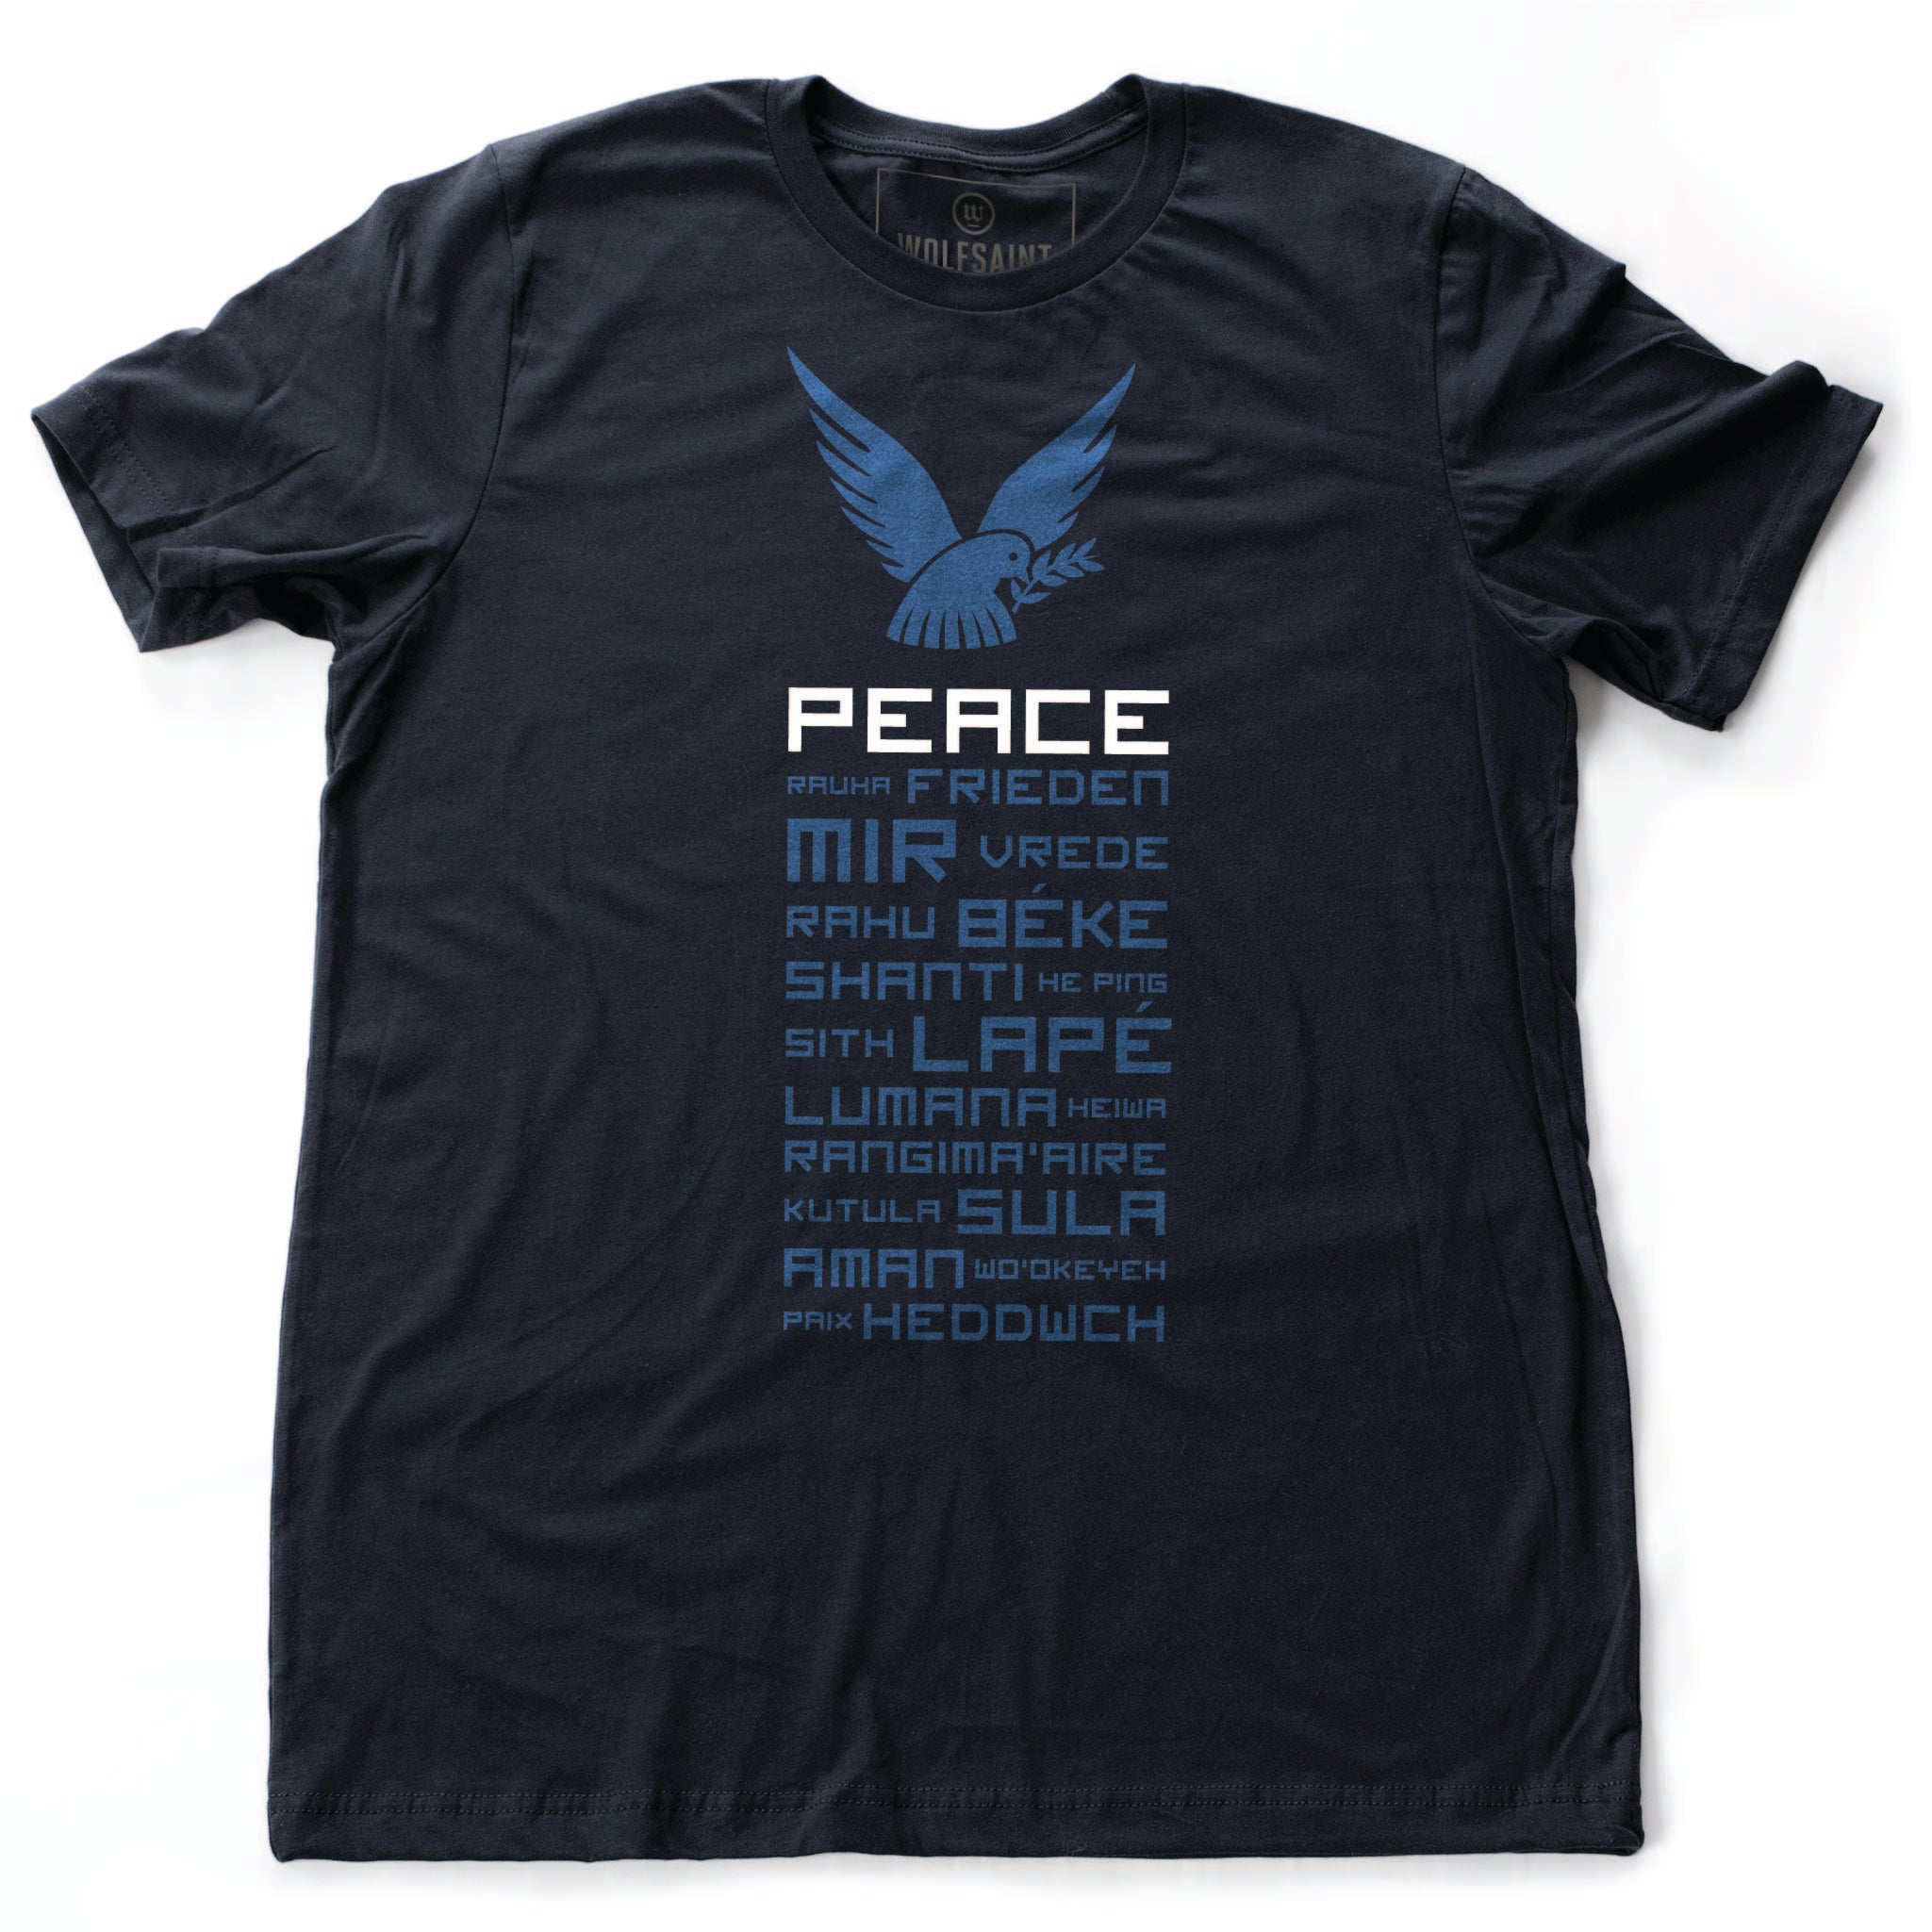 A classic retro graphic t-shirt in navy Blue, featuring a dove above the word “PEACE.” Below, are the words for Peace in multiple languages from around the world. By fashion brand Wolfsaint, available at wolfsaint.net